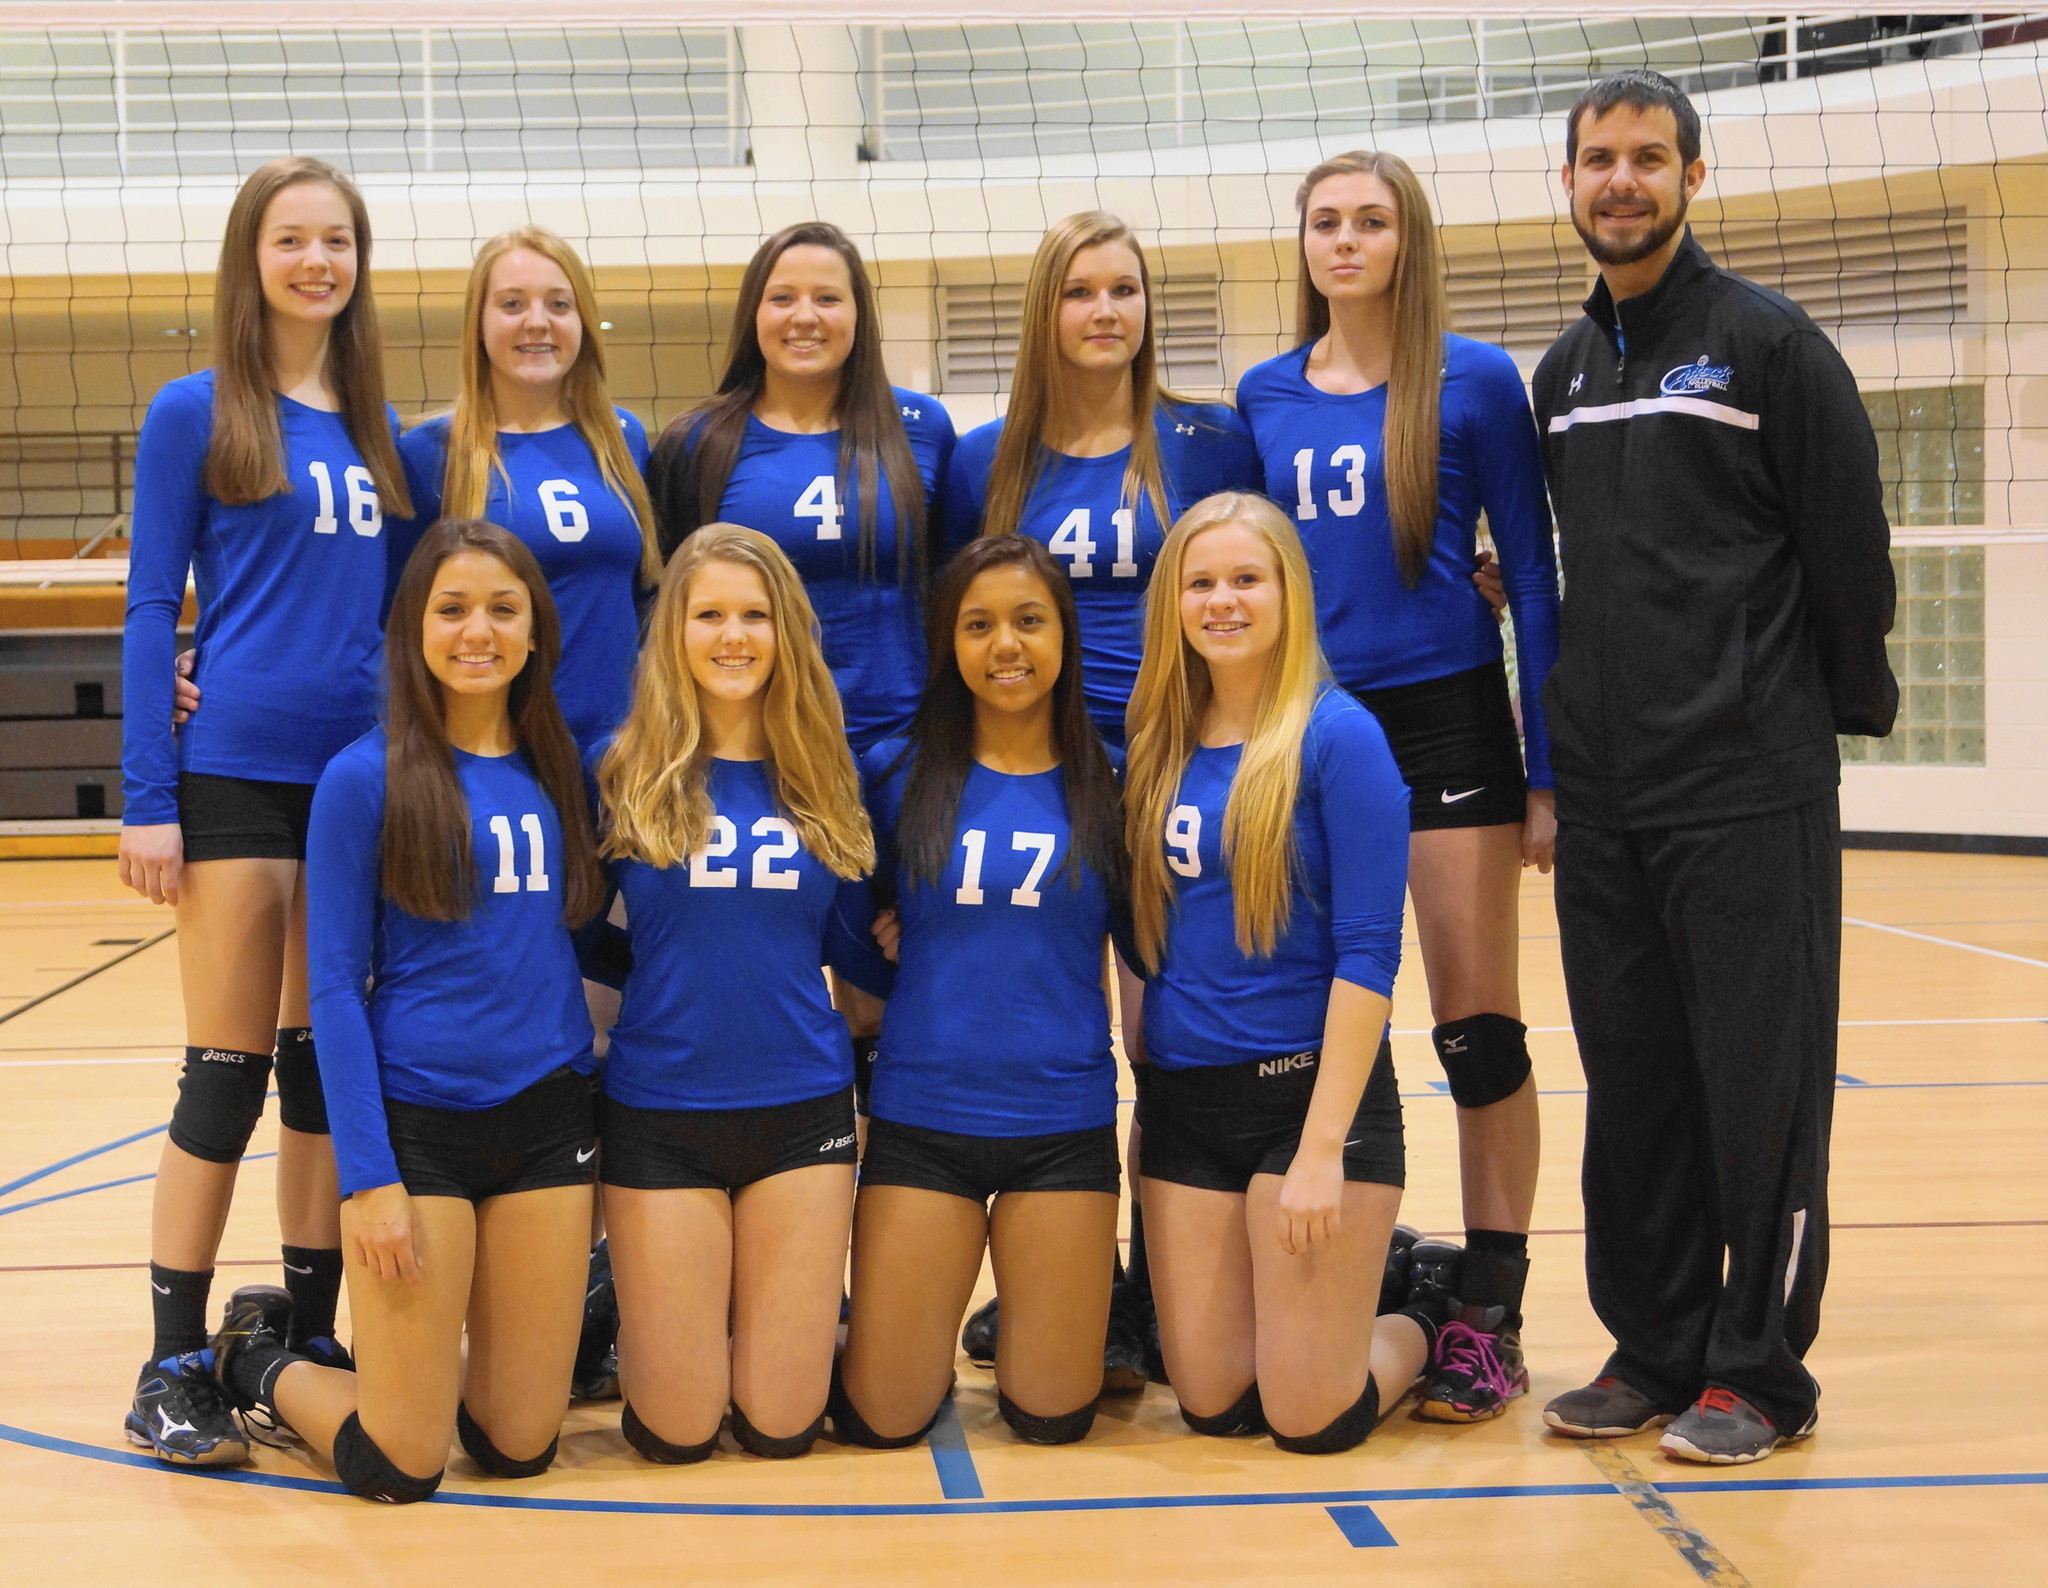 Attack 15 Select Girls Volleyball Team Wins Circus Series Tournament In